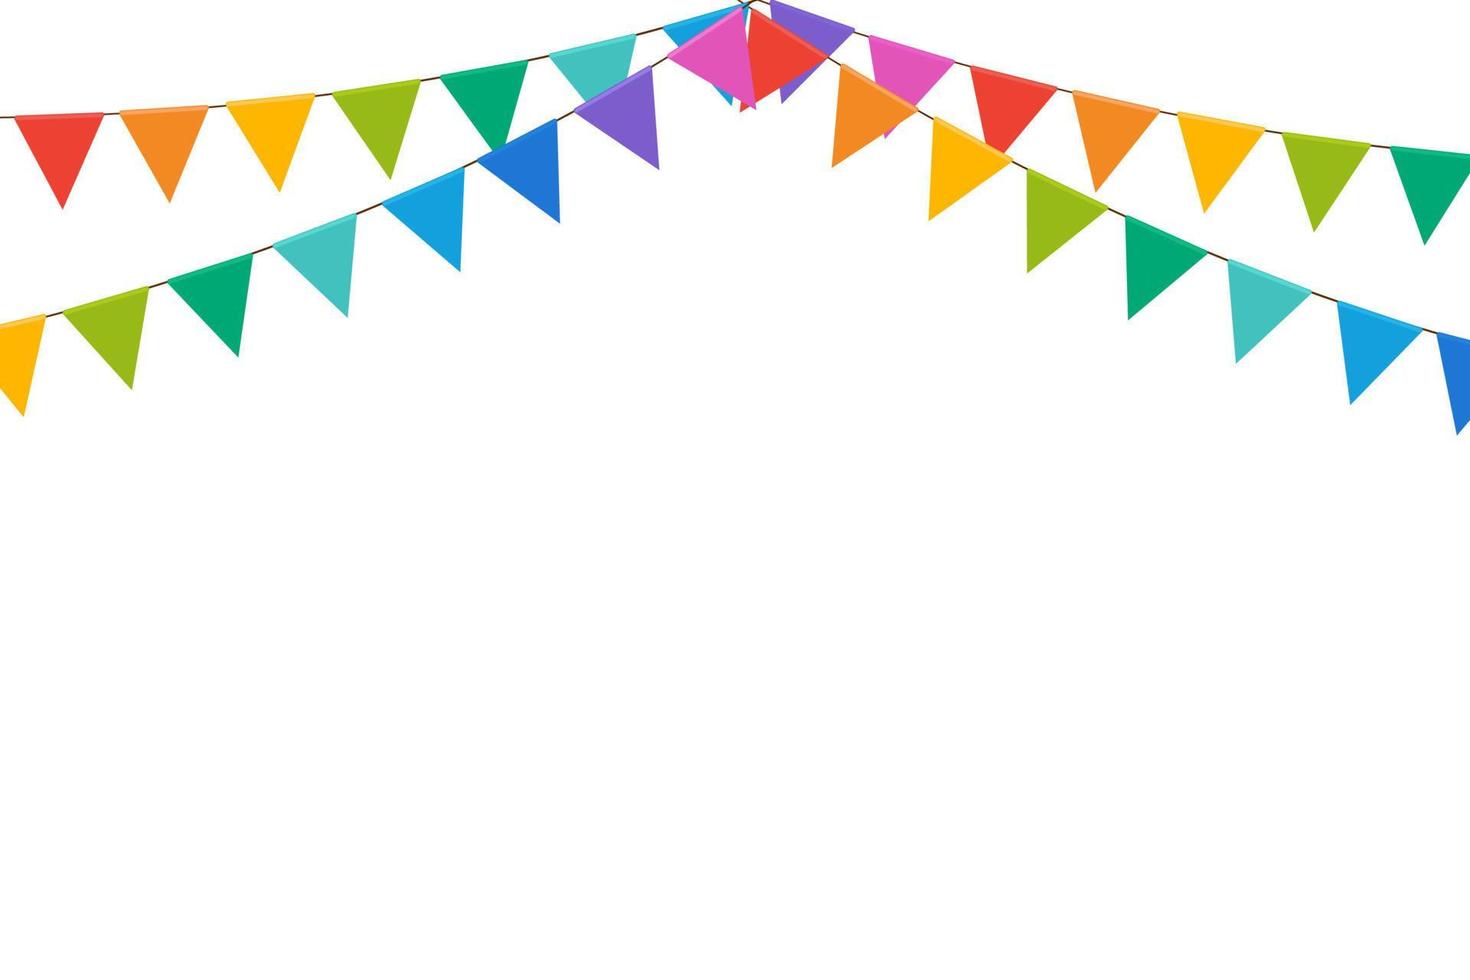 Carnival garland with colorful flags isolated on white background. festival decoration concept. vector